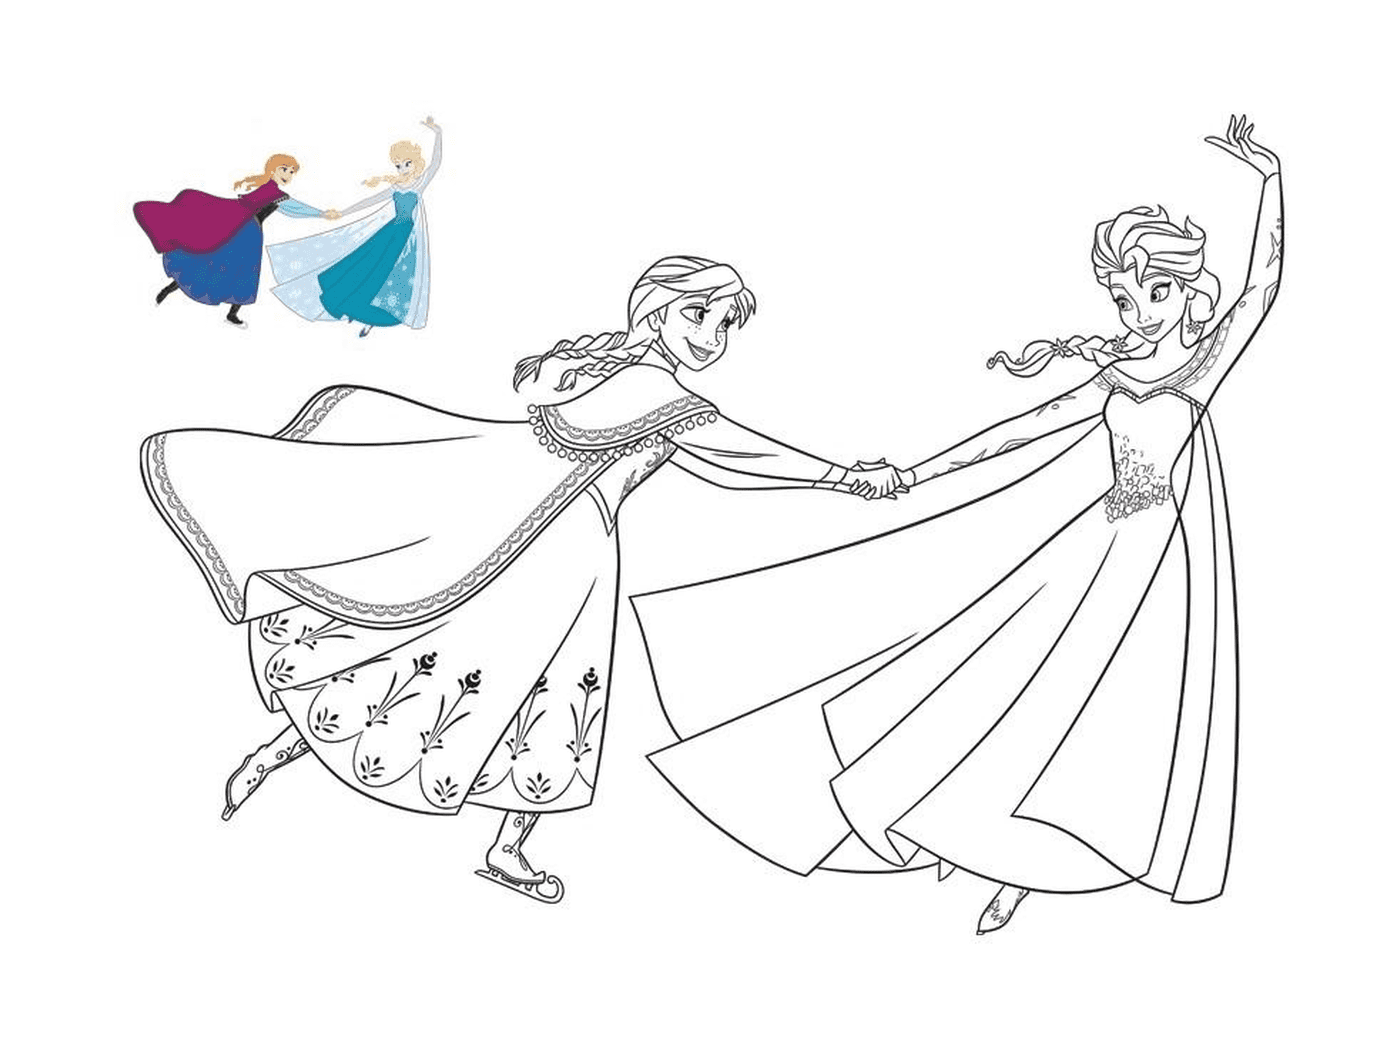  Elsa and Anna, The Snow Queen 